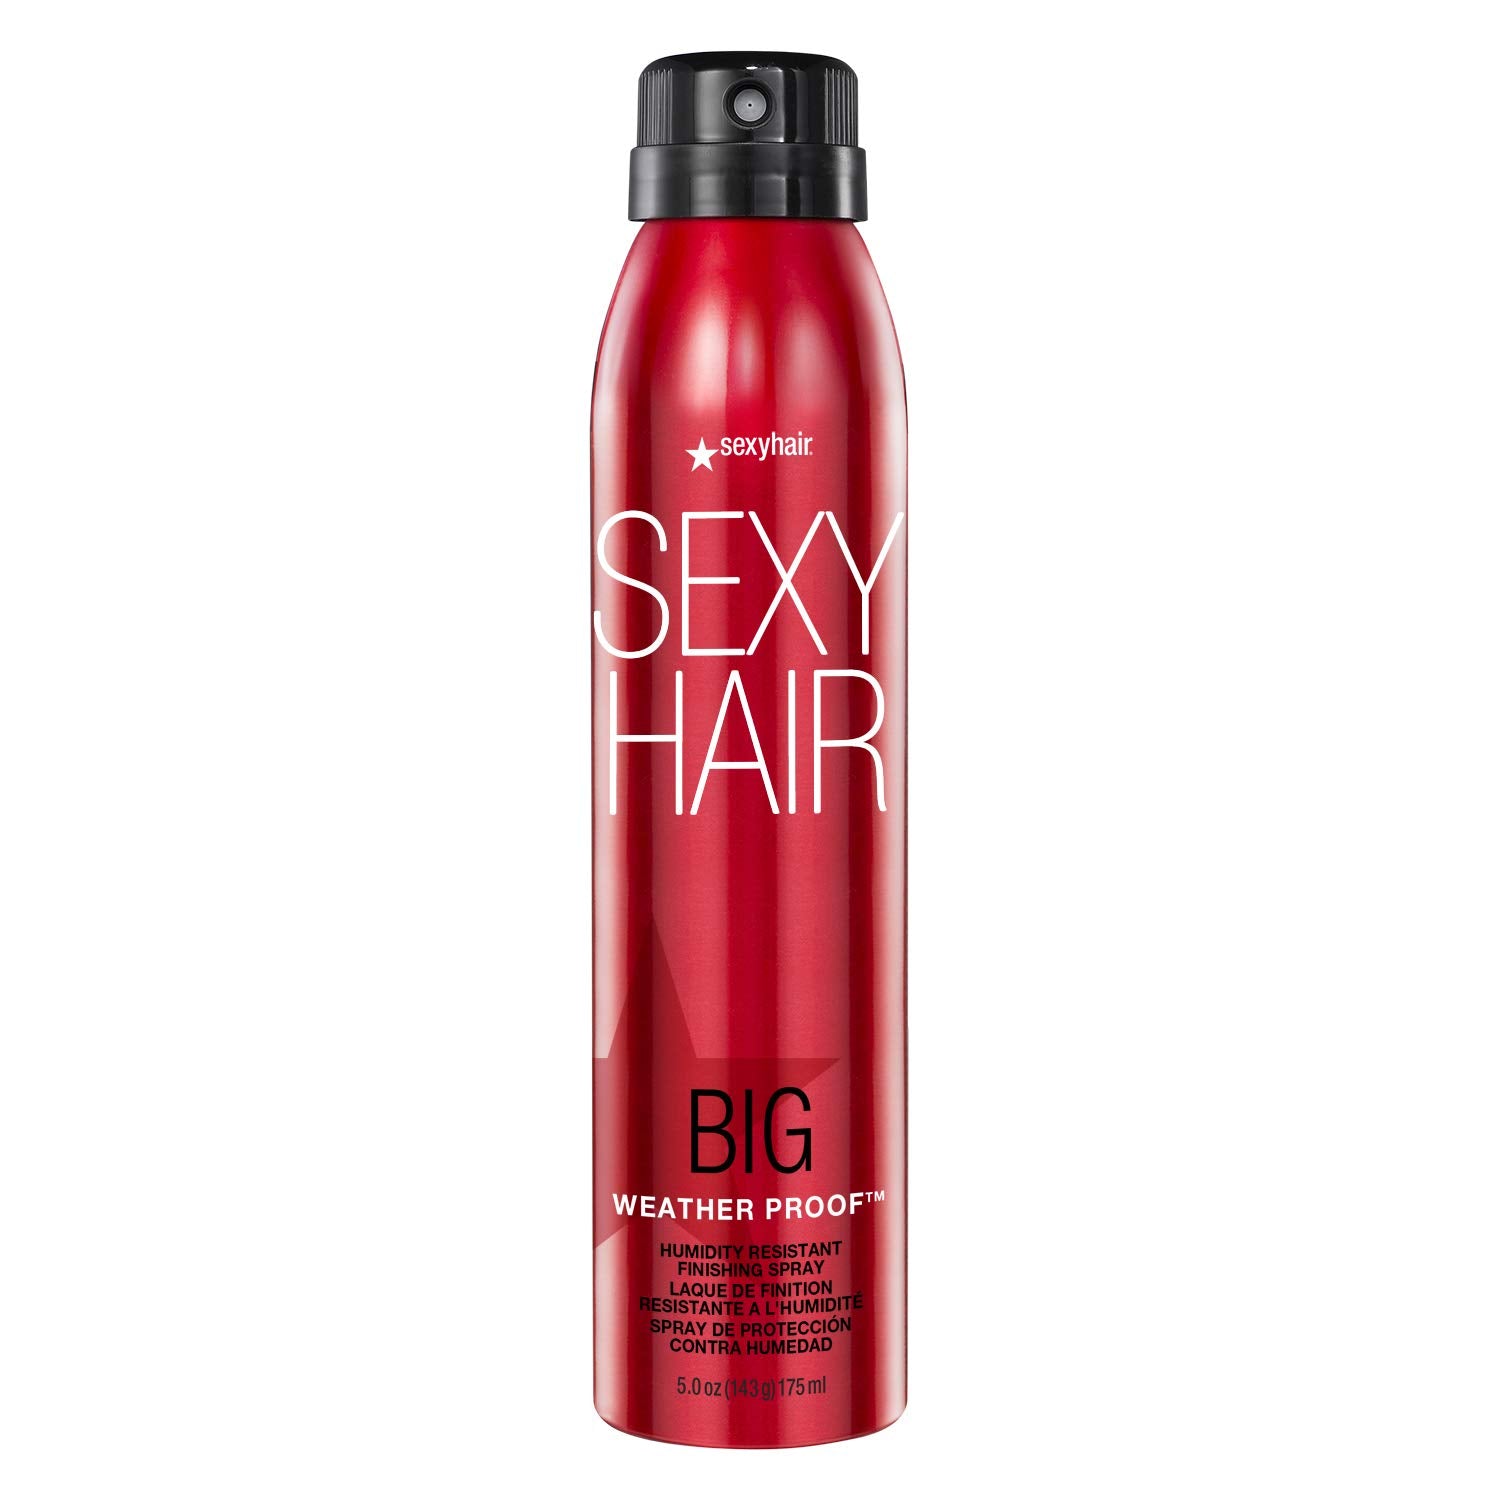 SexyHair Big Weather Proof Humidity Resistant Finishing Spray - 5 oz (Buy 3 Get 1 Free Mix & Match)